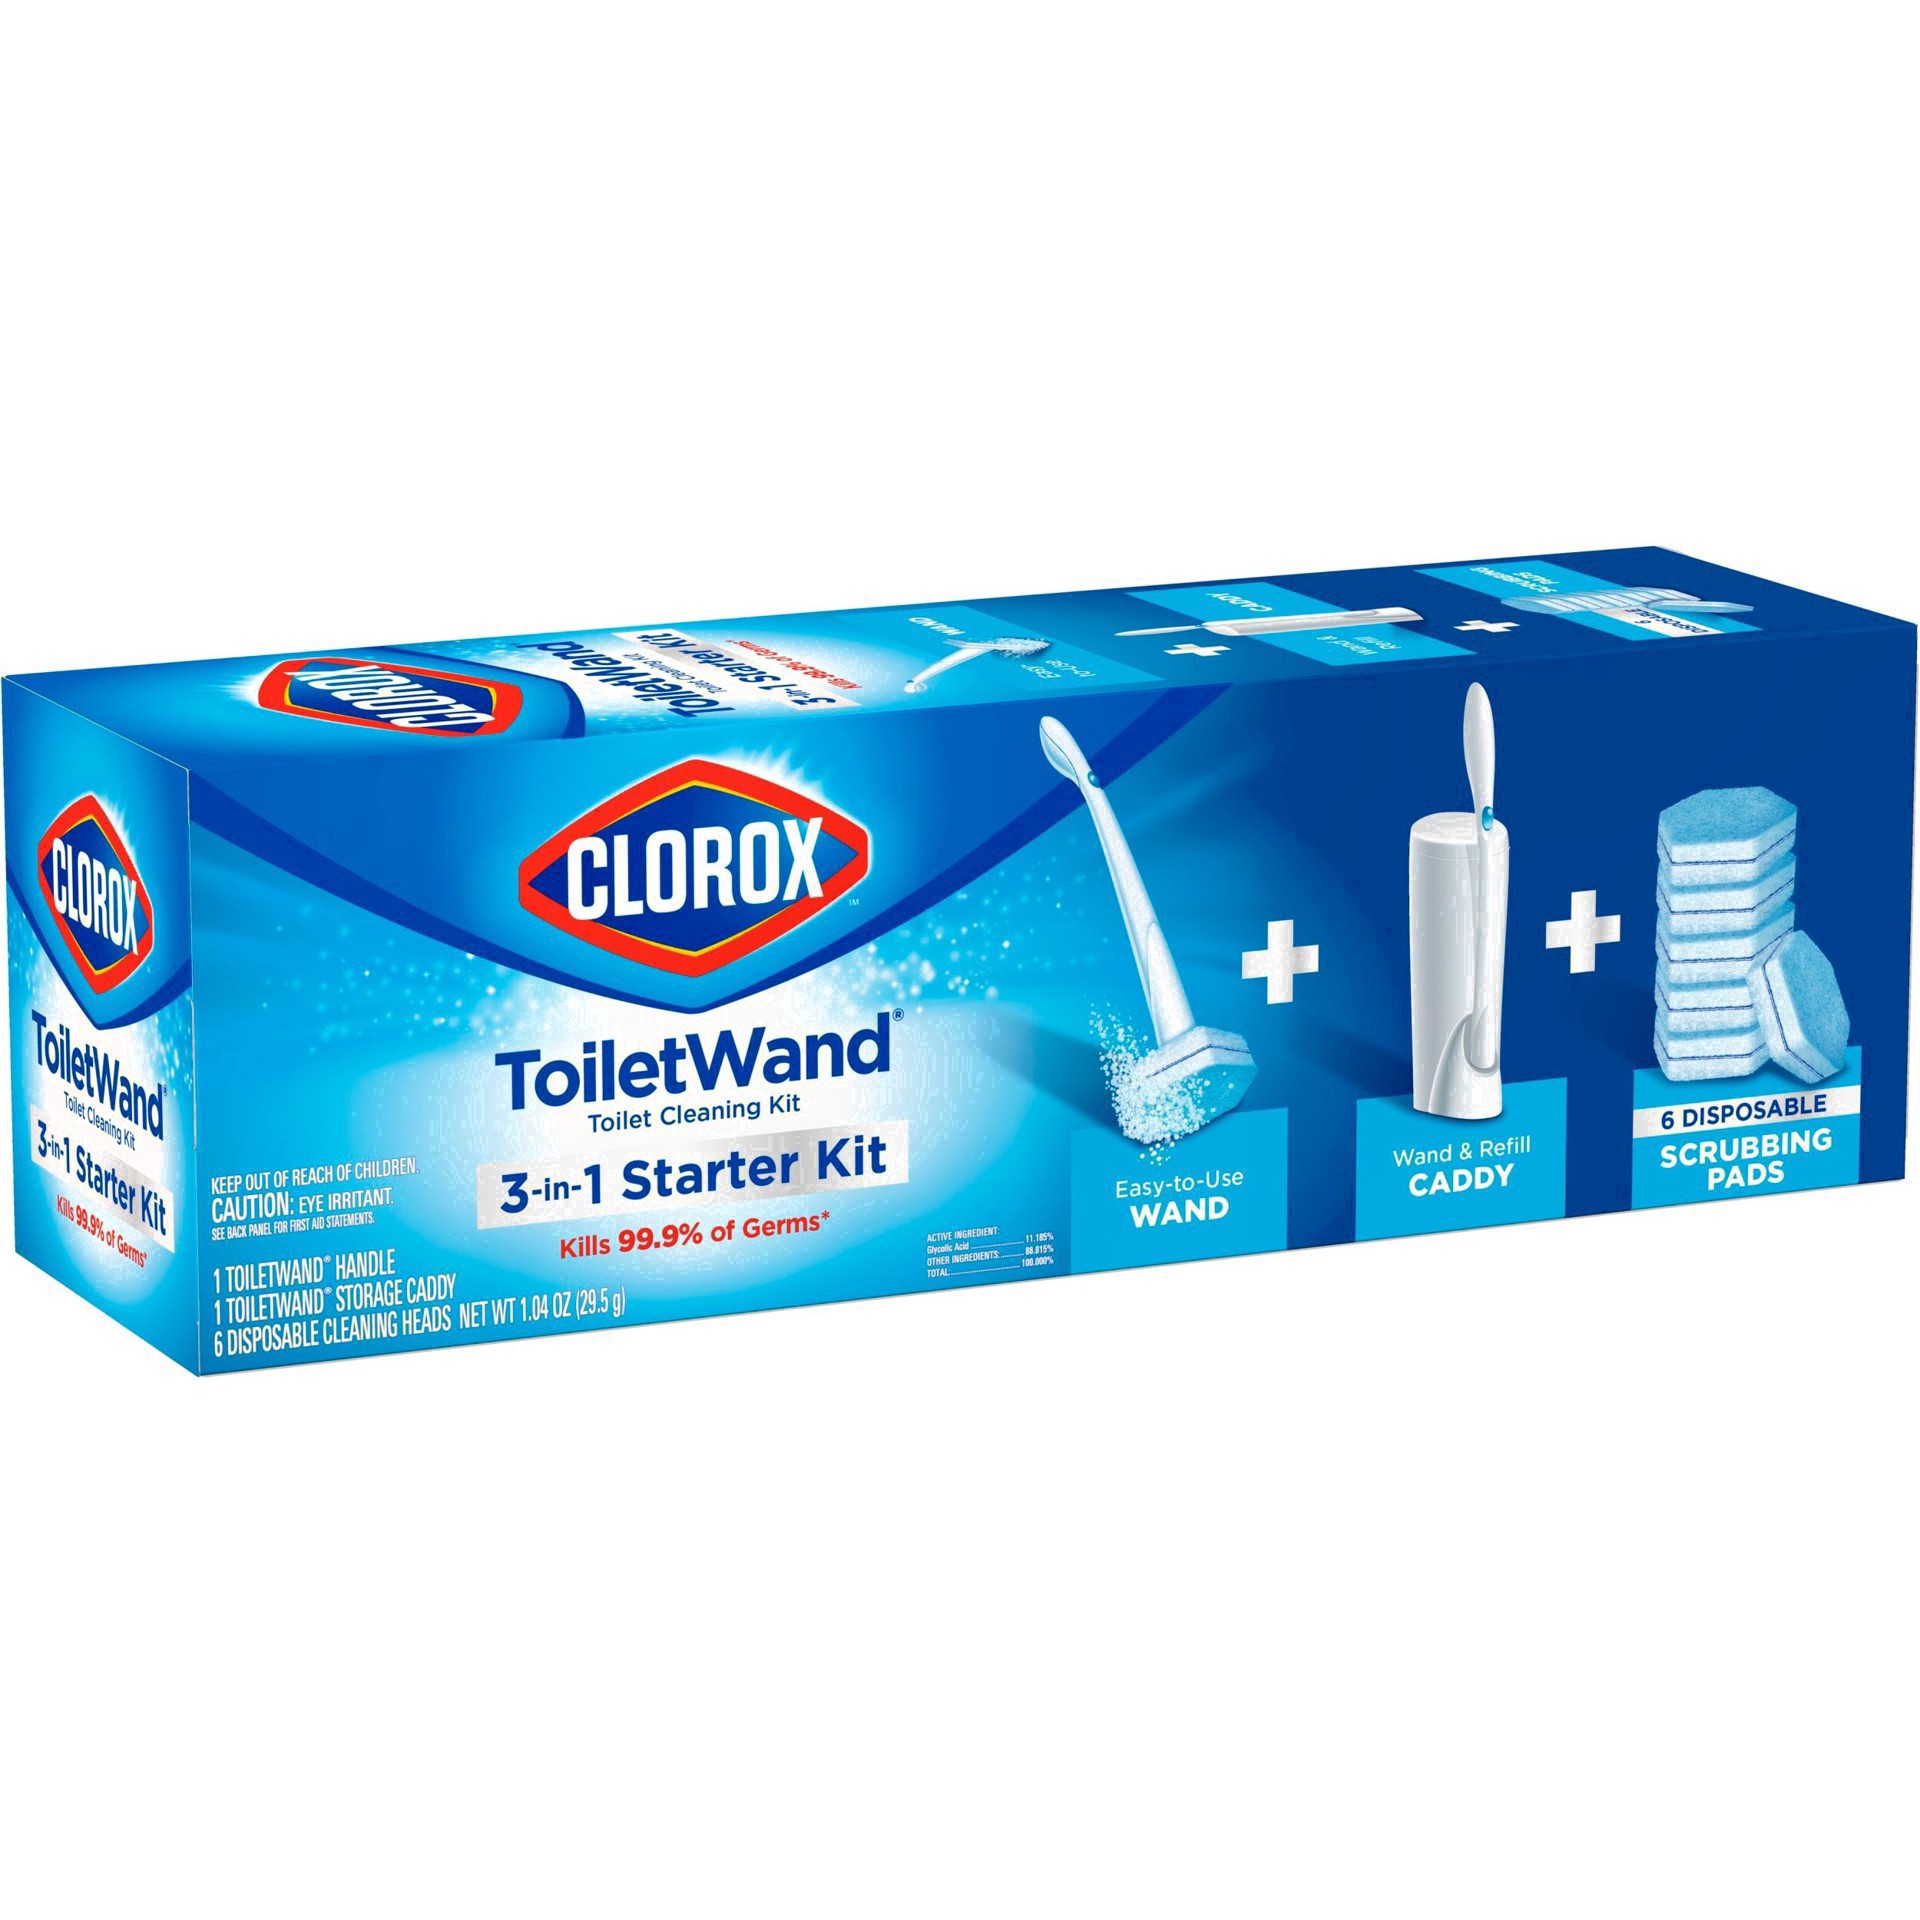 slide 42 of 176, Clorox Toilet Wand 3-in-1 Starter Toliet Cleaning Kit, 1 ct